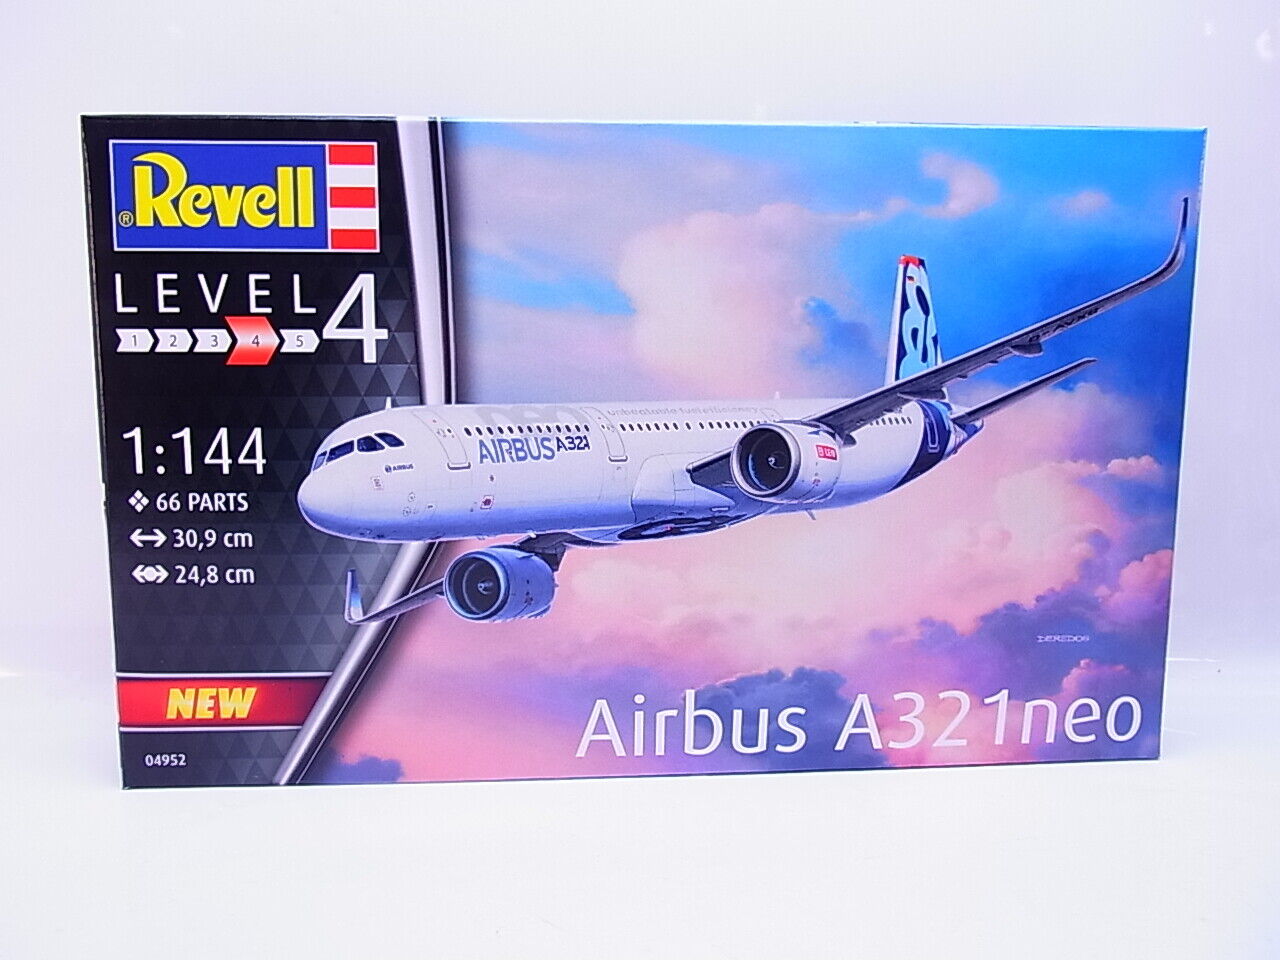 62882 revell 04952 airbus a321neo kit 1:144 new original packaging